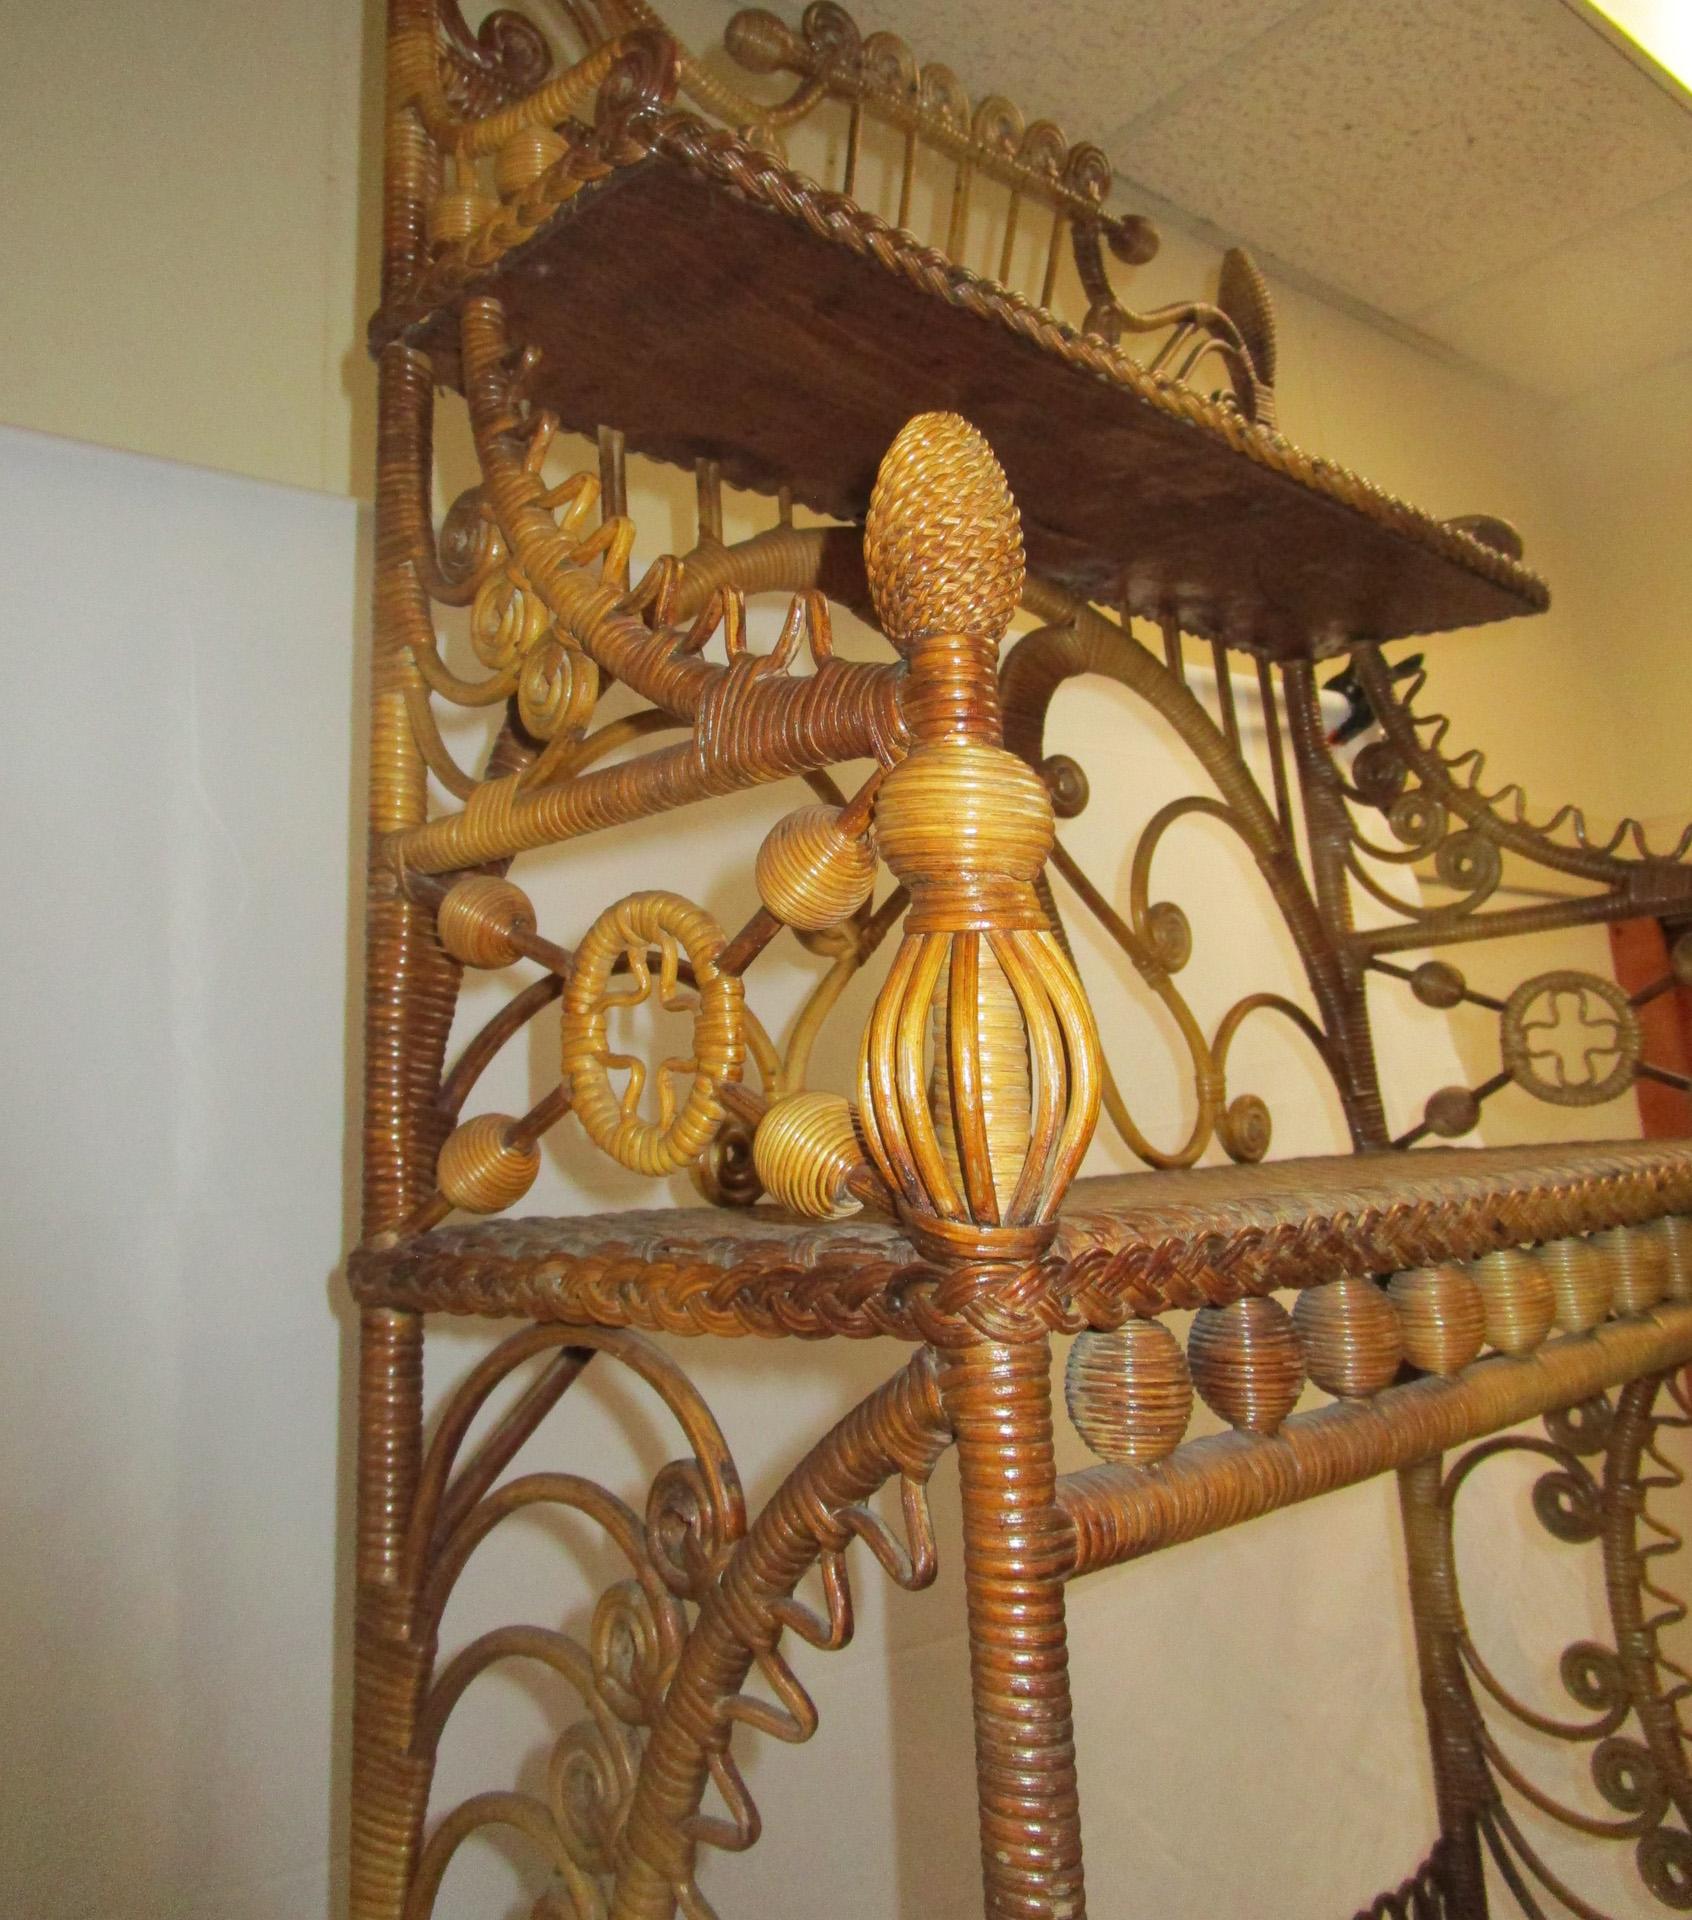 From the premiere American wicker manufacturing firm of Heywood Brothers & Co., Gardner, Massachusetts, this fantastic natural wicker Étagère has all the bells and whistles of Victorian excess. With its spools, curlicues, scallops, wooden balls,